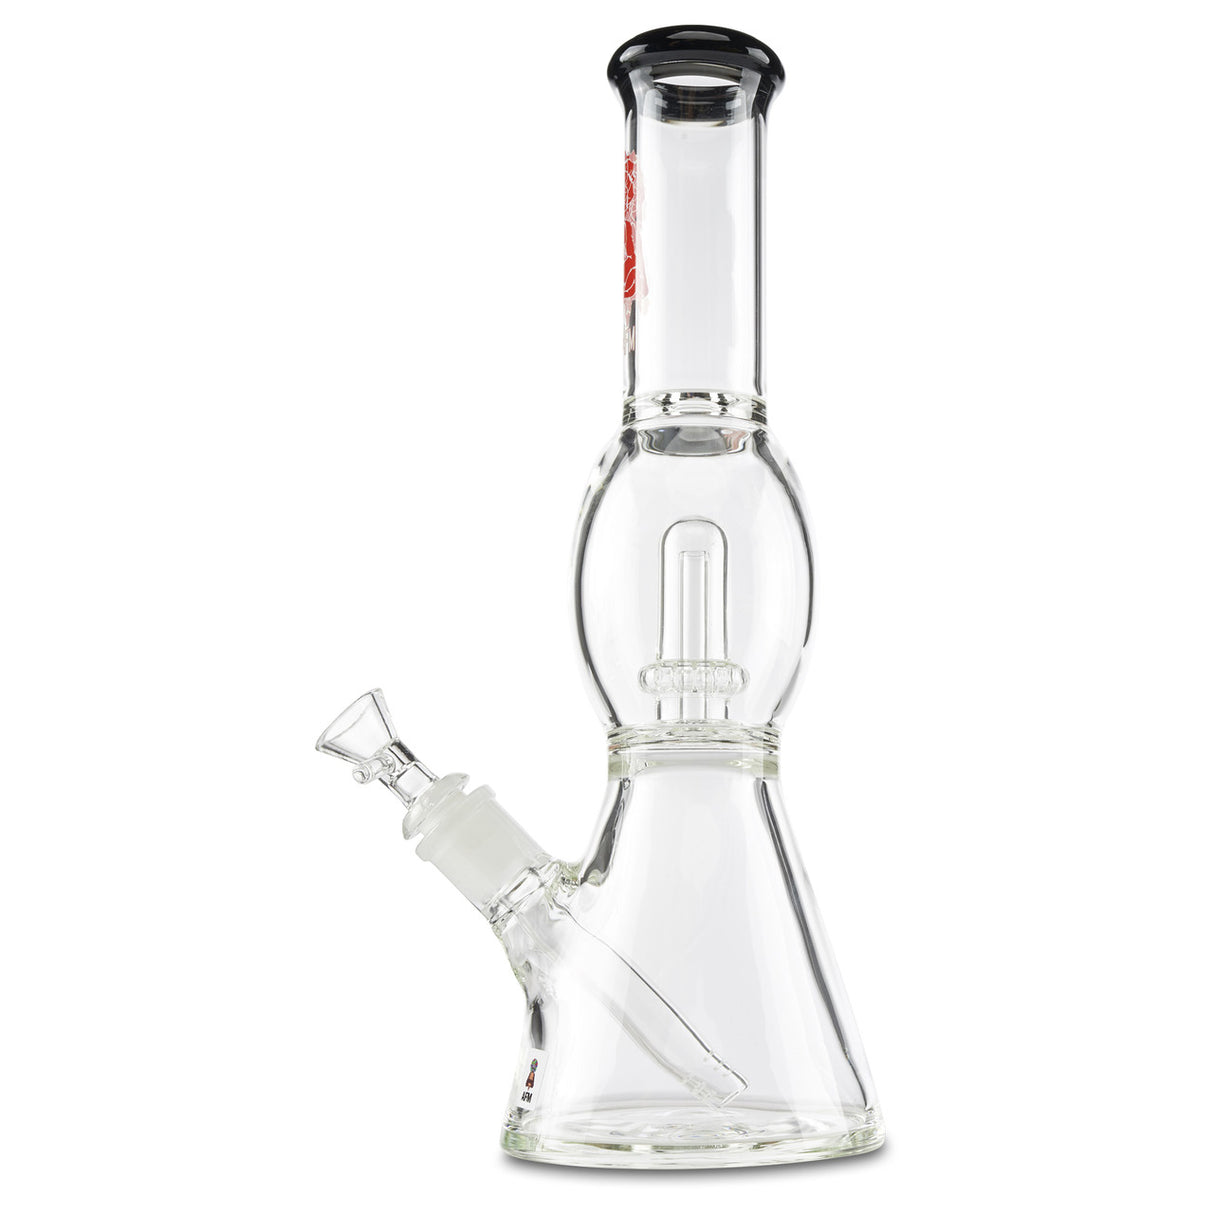 afm short red and black ufo perc bong with glass downstem and slide